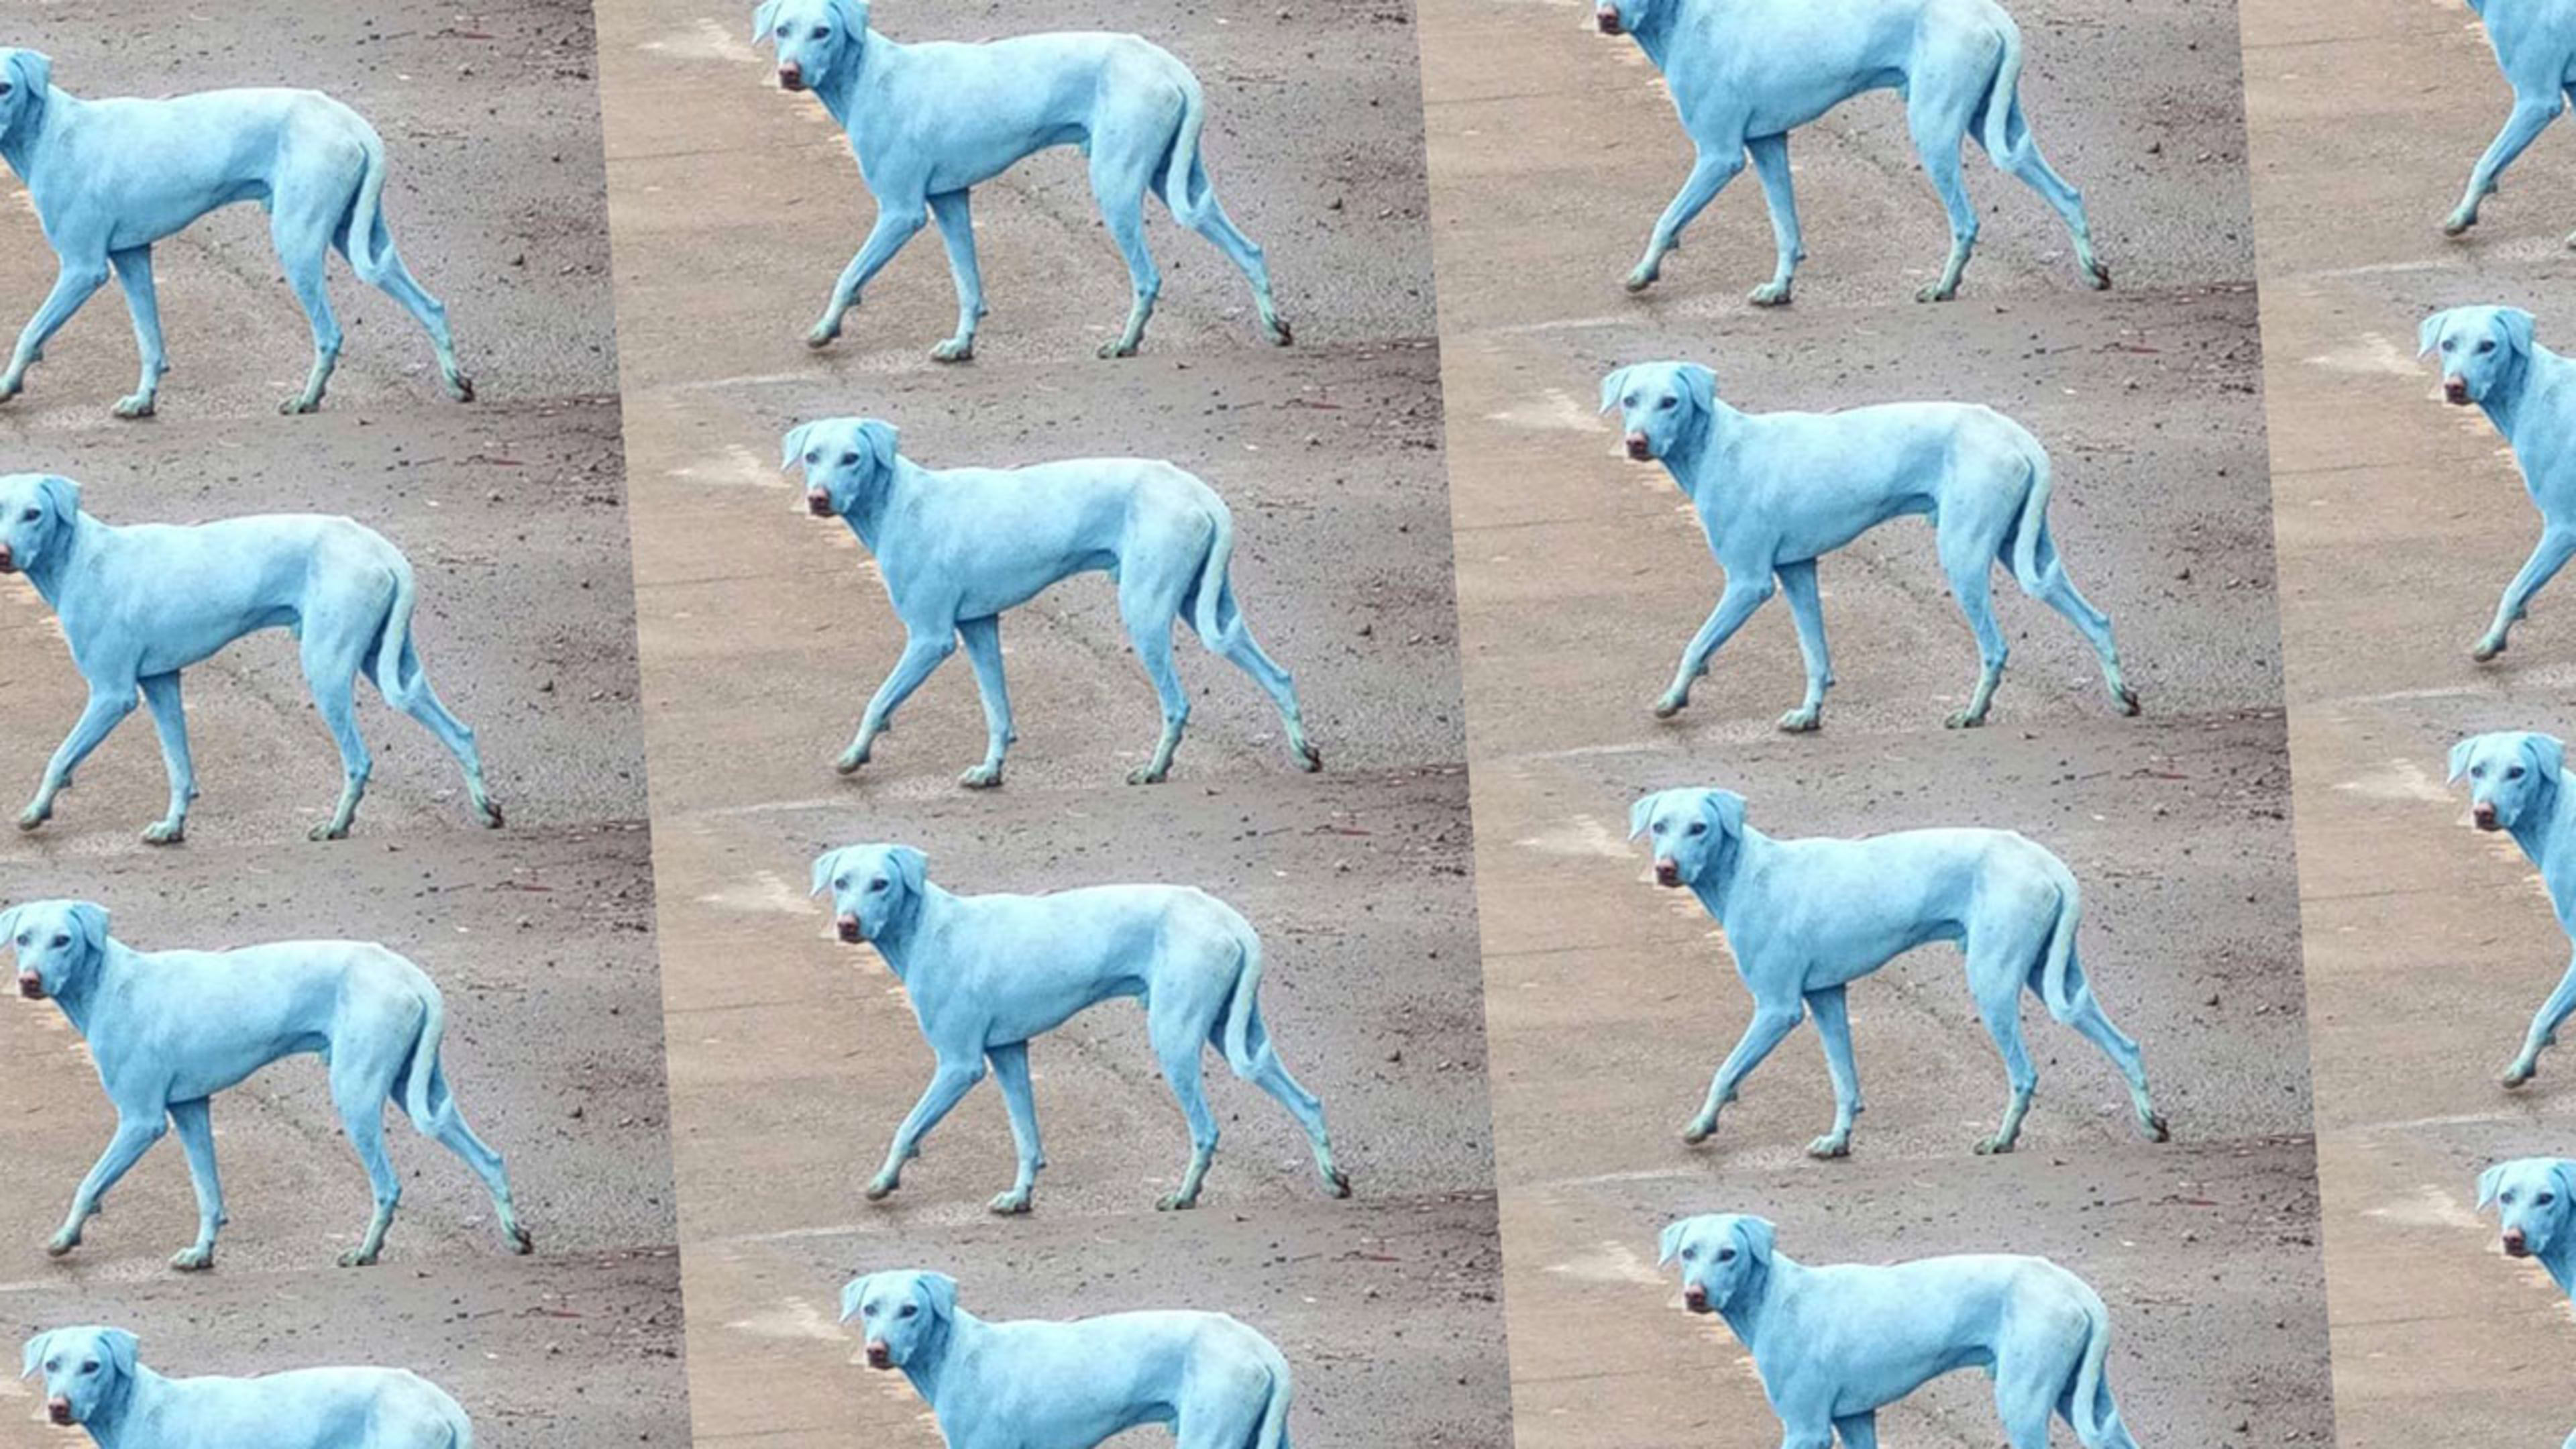 Illegal industrial dumping was turning dogs blue in Mumbai